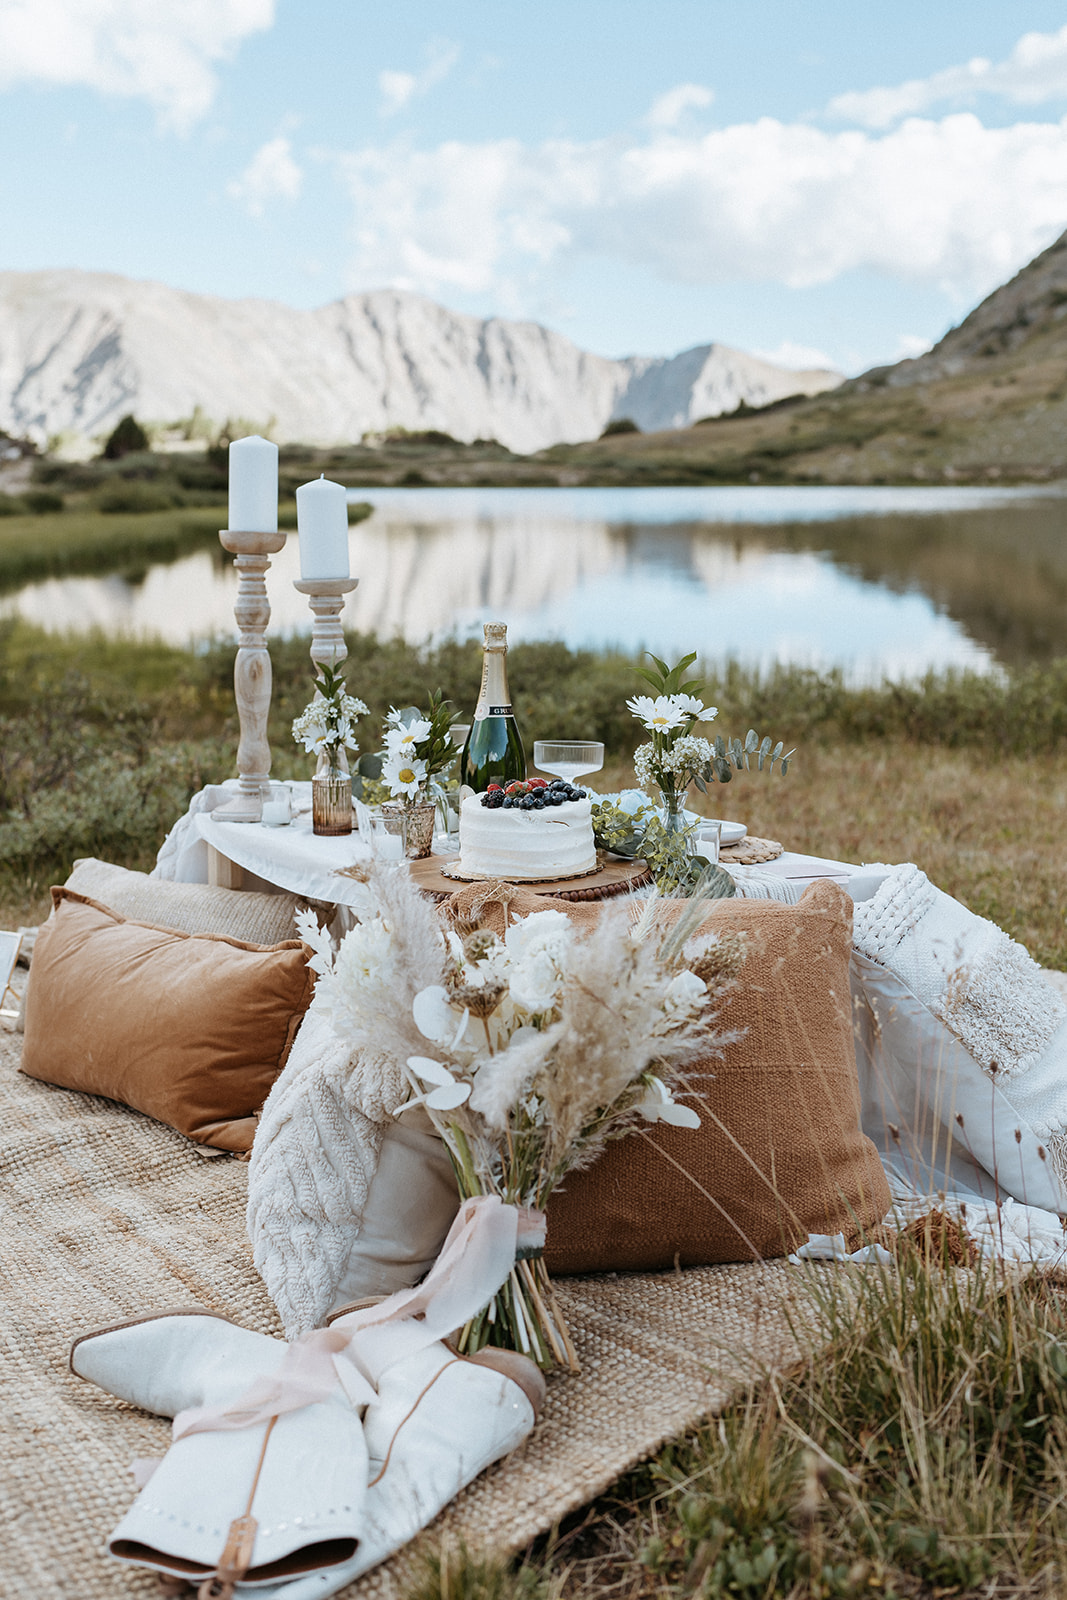 A picnic table set up by a mountain lake with pillows, cake and champagne